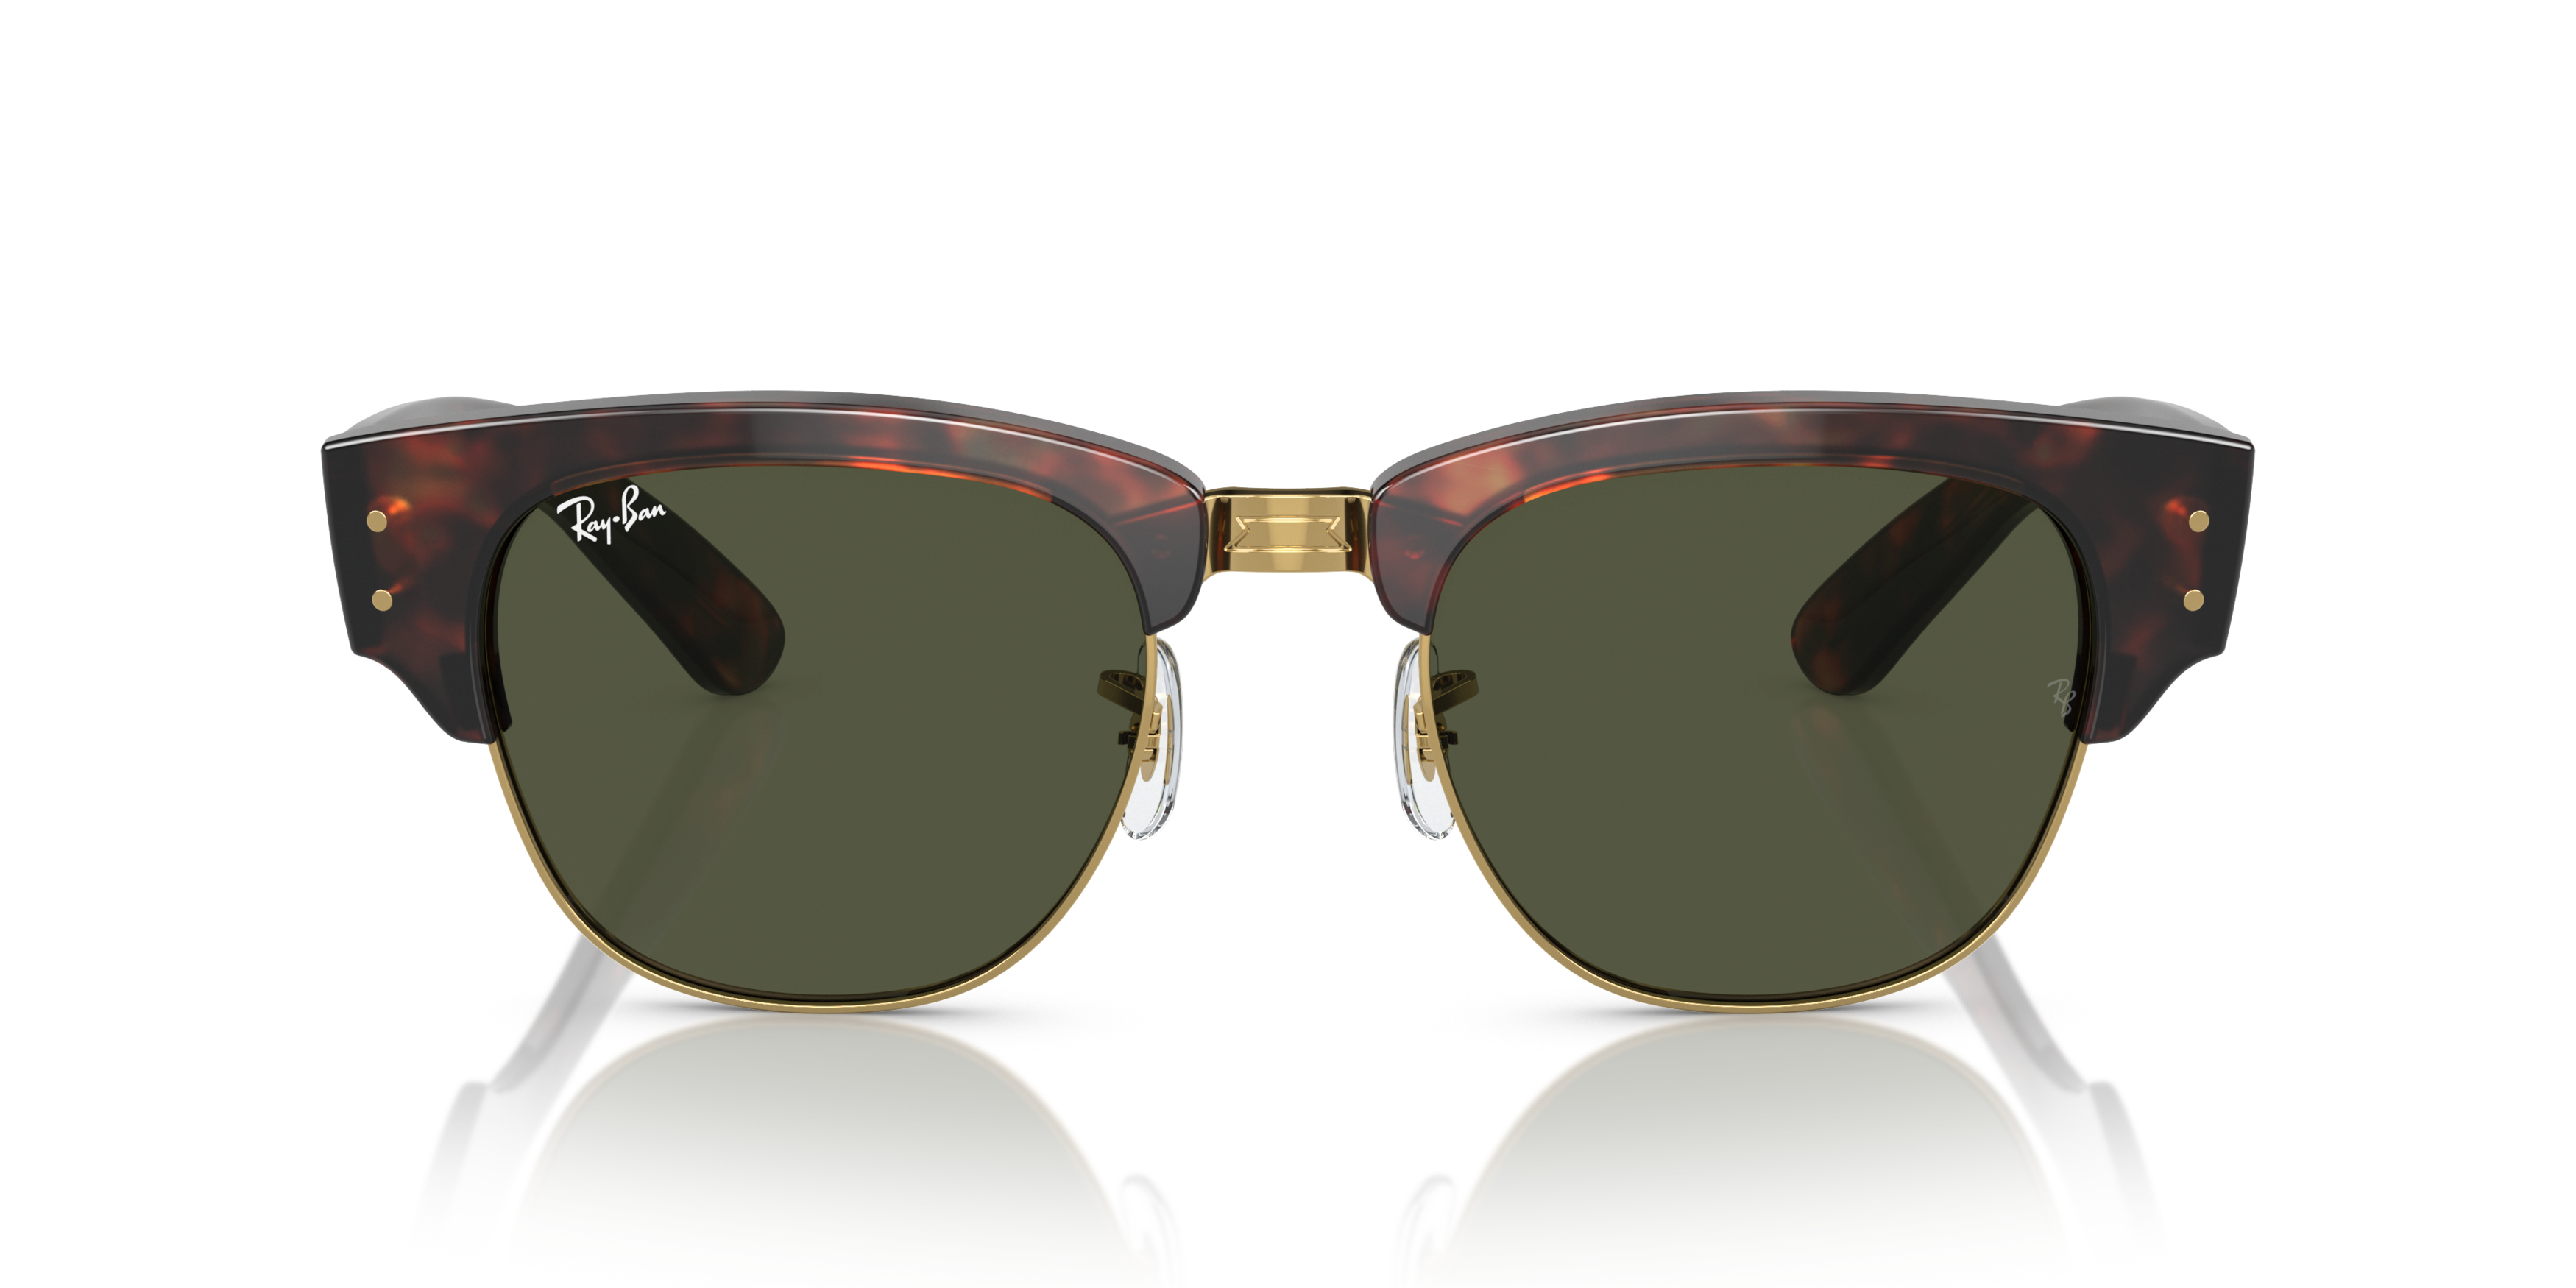 [products.image.front] Ray-Ban 0RB0316S 990/31